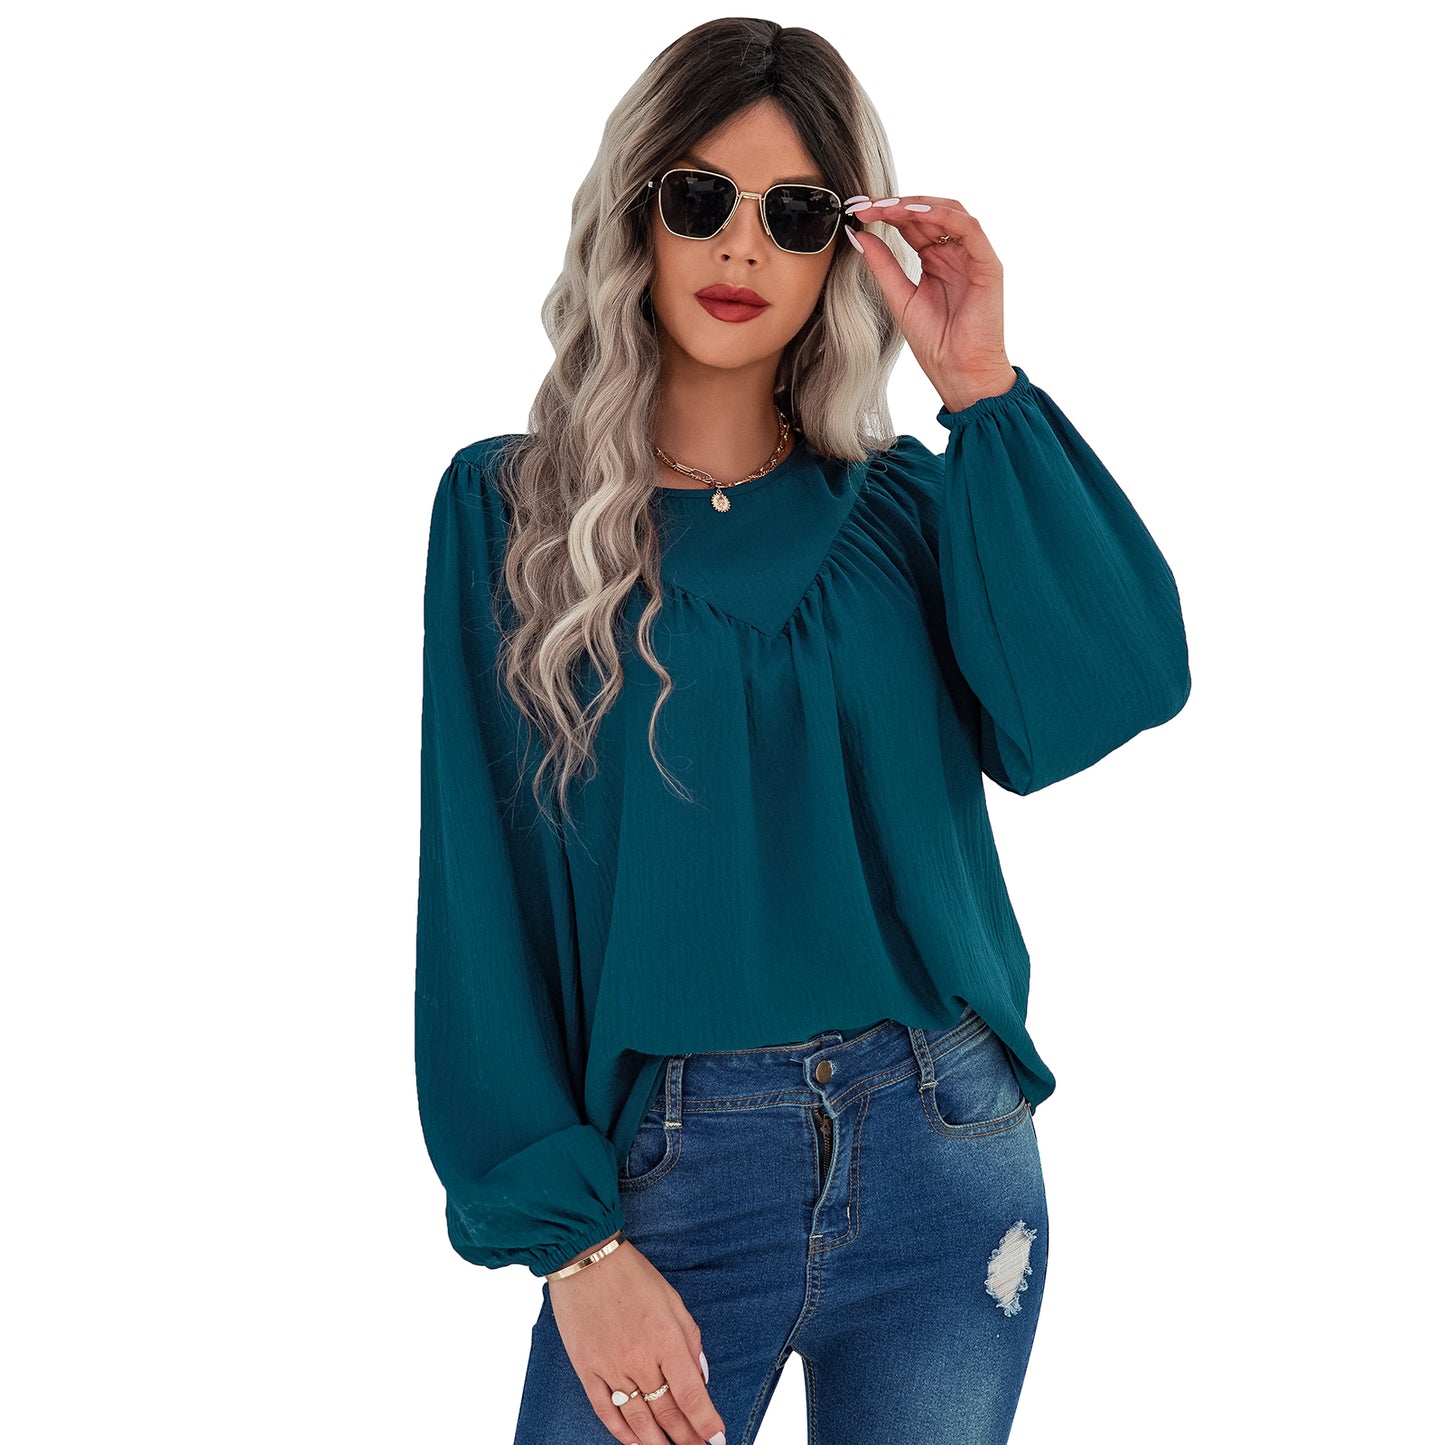 YESFASHION Women Clothing Solid Color Round Neck Pullover Shirt Tops